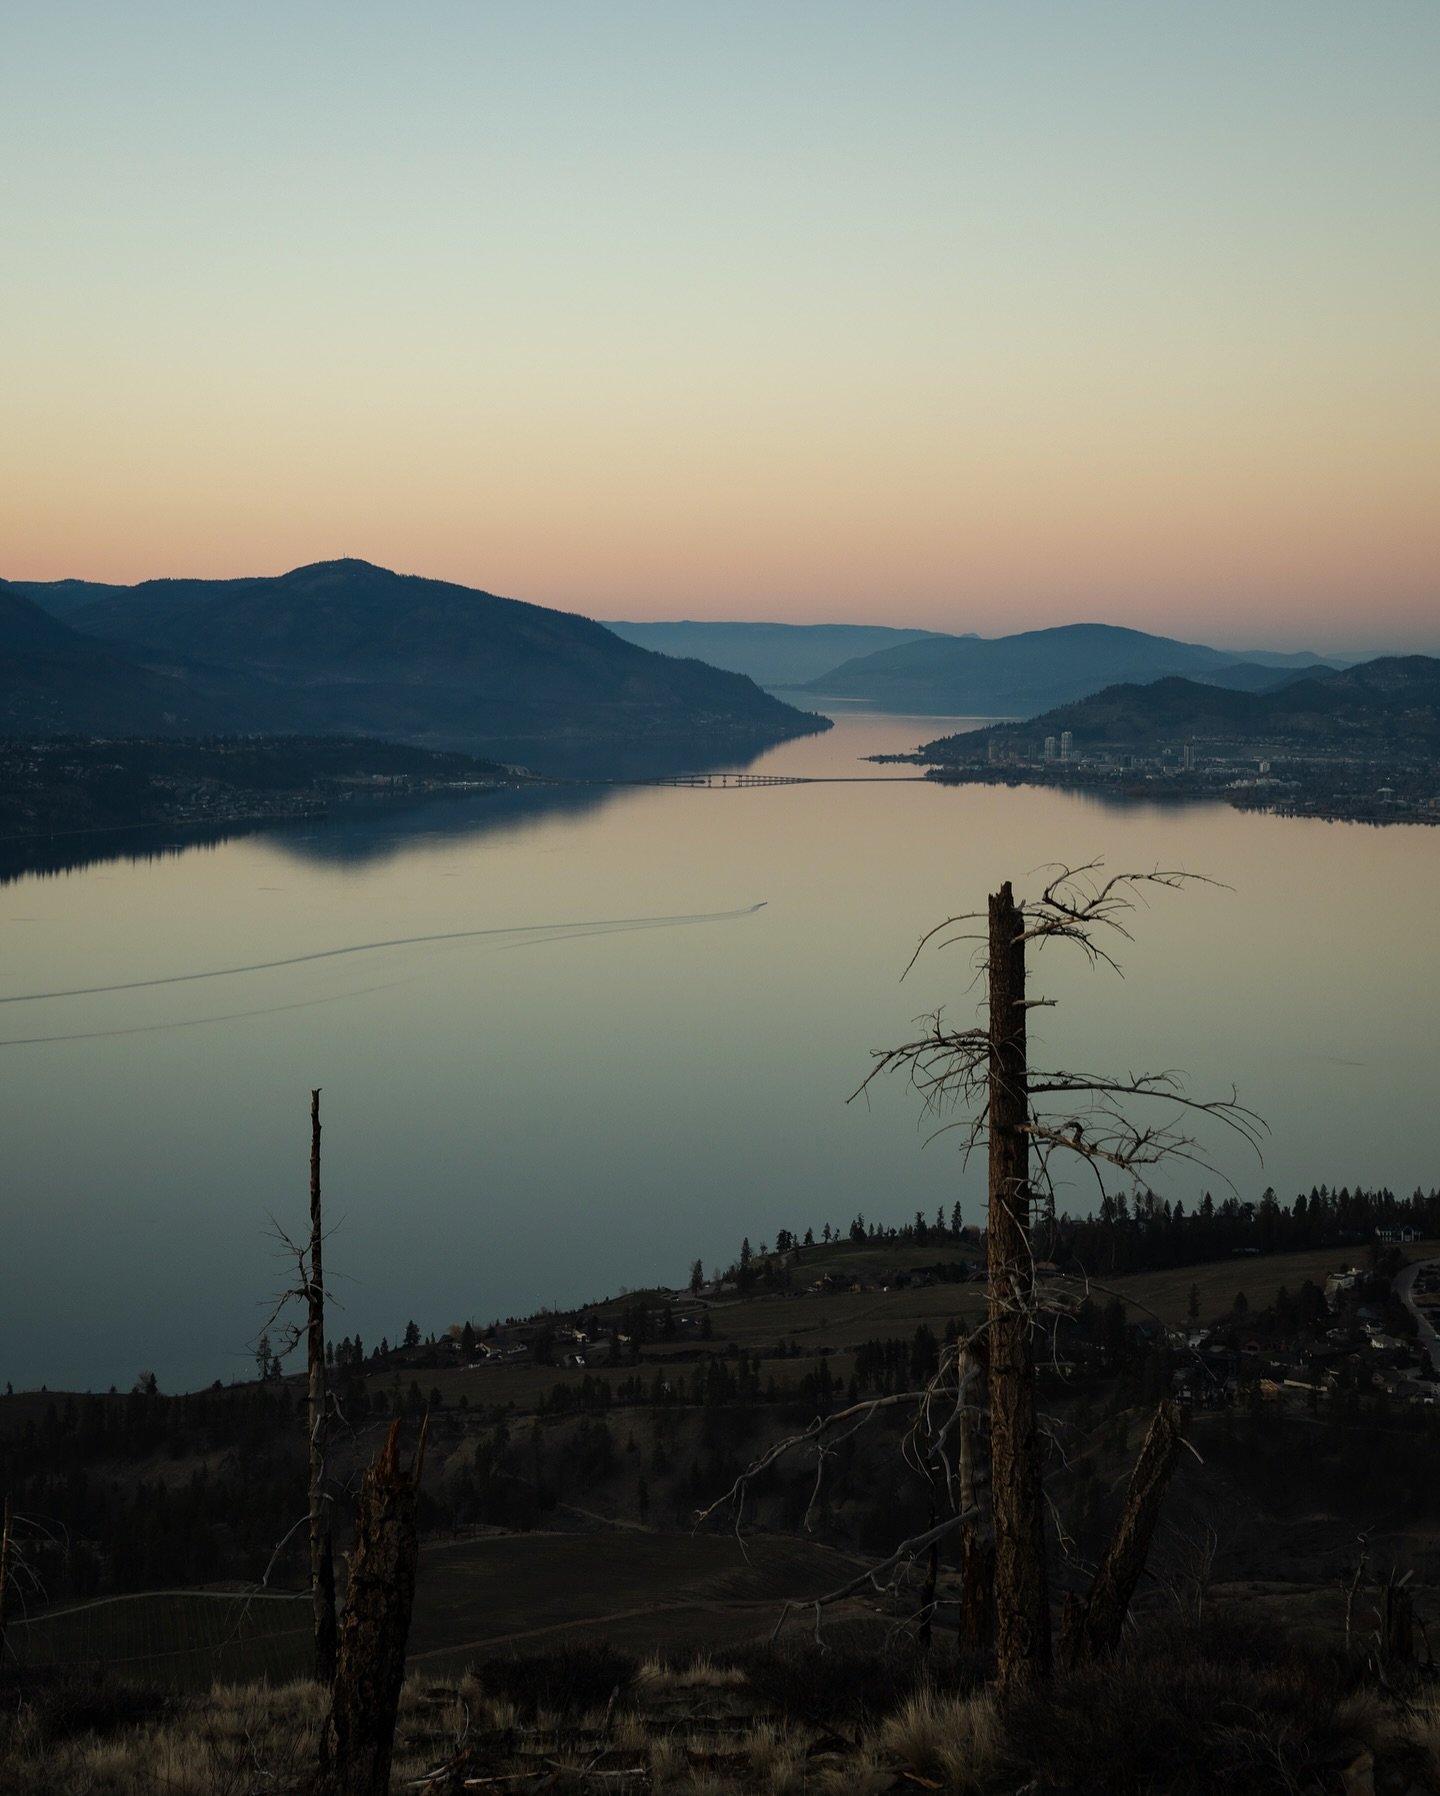 A lone boat glides along the perfectly still waters of Okanagan Lake. I love the simple pleasures of watching the sun set with a view like this. I also love that spring is here in the Okanagan and in a few weeks everything will be nice and green agai